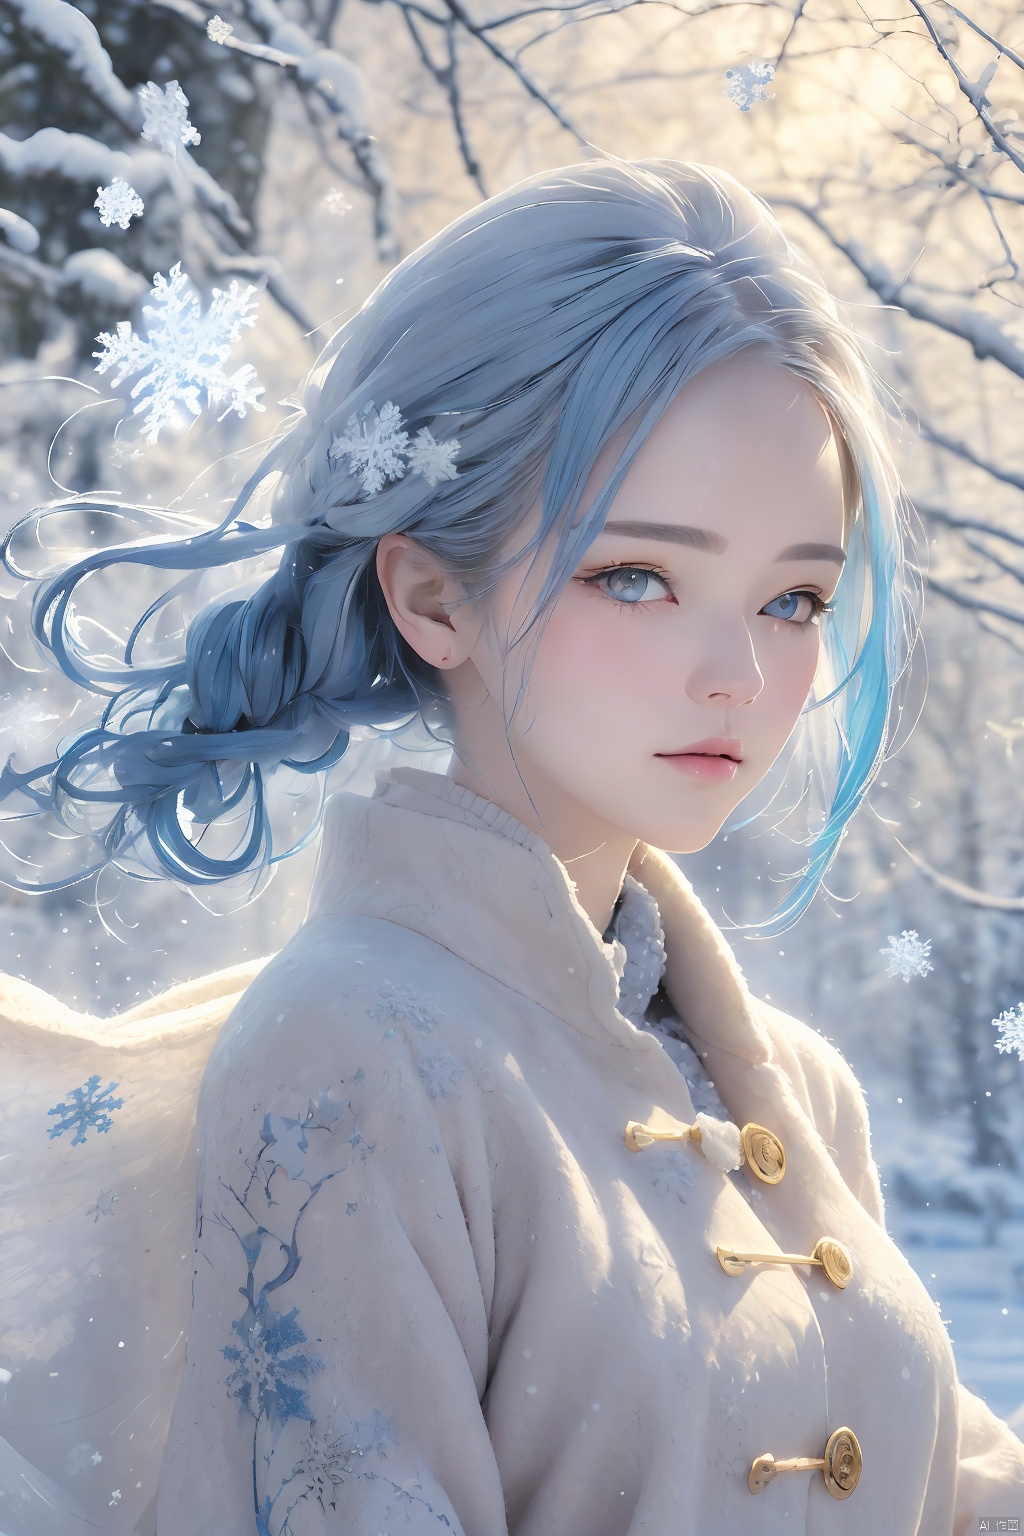  moments stretch and twist, turning a hurried walk into an eternity of swirling flakes. (masterpiece, detailed artwork), Snowflakes,1girl, golden eyes, sleepy, blush, (detailed lips), (cute winter coat, knitted winter coat), layla, twin drills, drill locks, blue hair, jewelry, sleepy eyes, Snow, snowflakes,masterpiece, jijianchahua